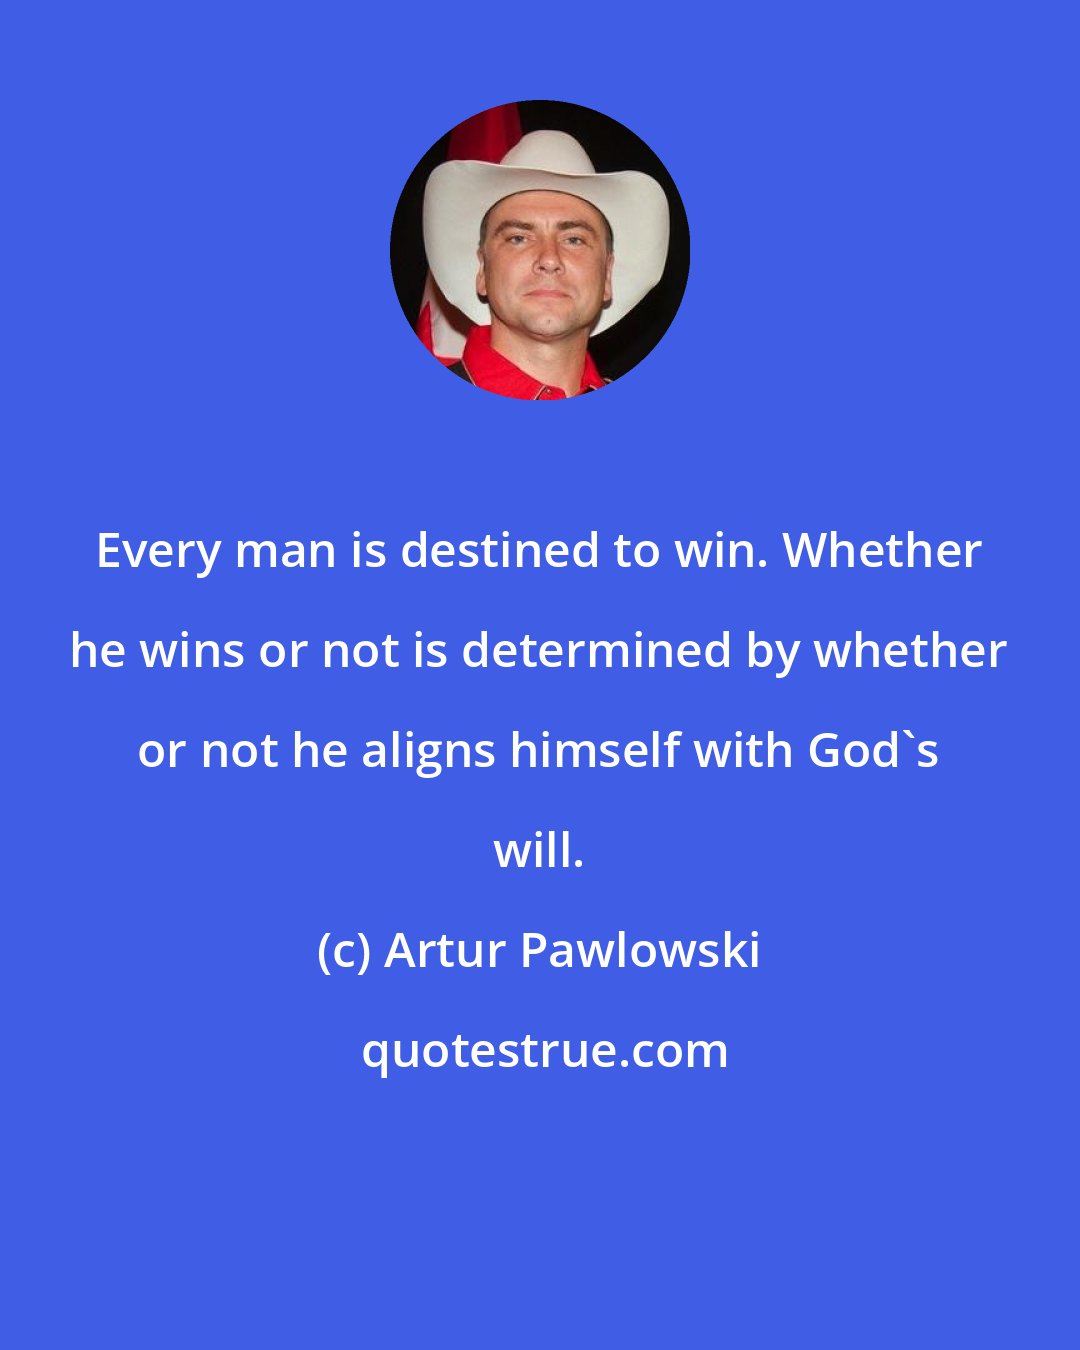 Artur Pawlowski: Every man is destined to win. Whether he wins or not is determined by whether or not he aligns himself with God's will.